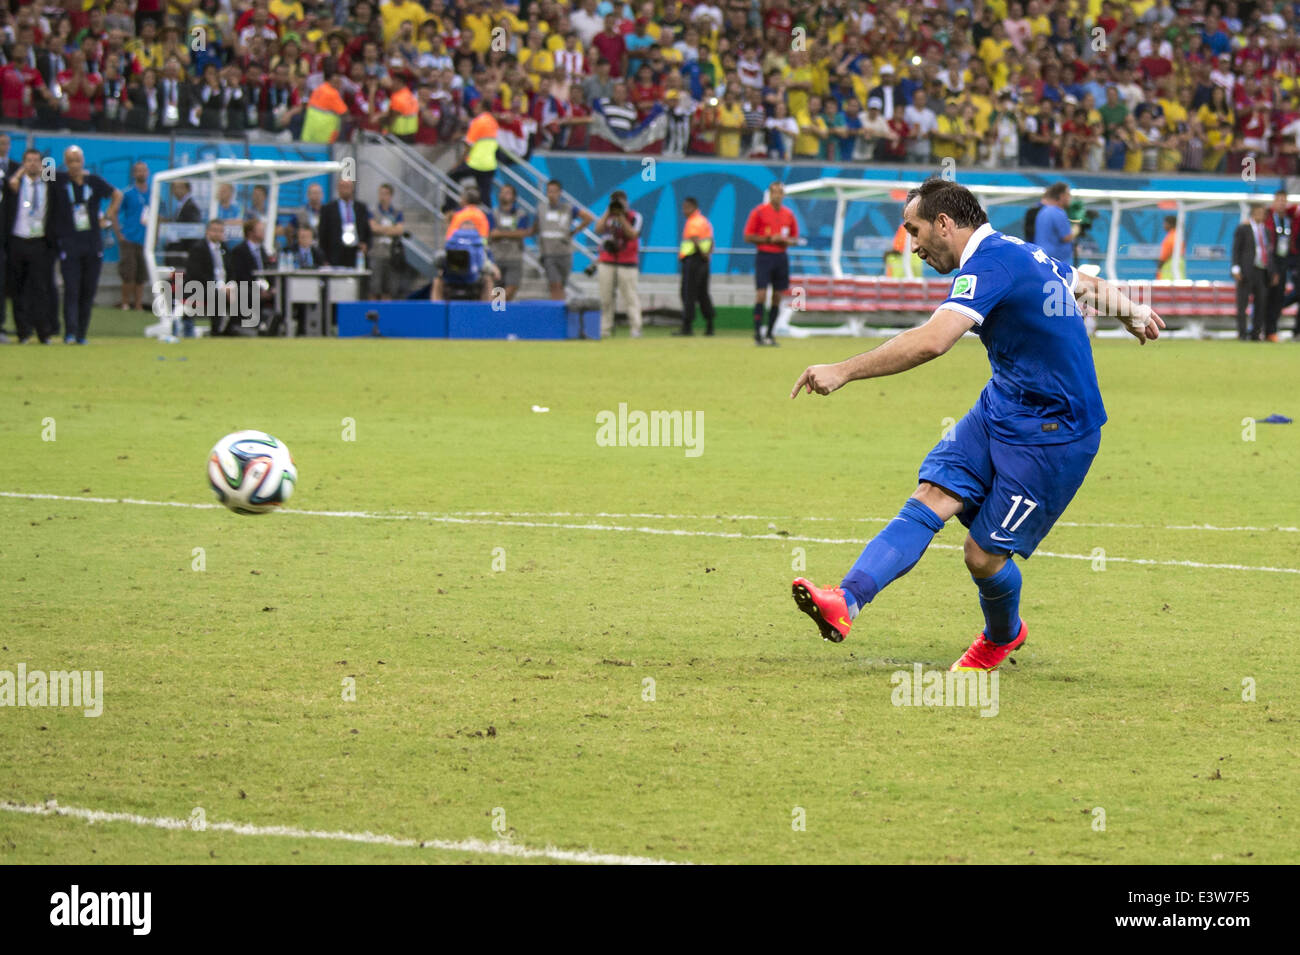 Recife, Brazil. 29th June, 2014. Theofanis Gekas (GRE) Football/Soccer : Theofanis Gekas of Greece misses in the penalty shoot-out during the FIFA World Cup Brazil 2014 Round of 16 match between Costa Rica 1(5-3)1 Greece at Arena Pernambuco in Recife, Brazil . Credit:  Maurizio Borsari/AFLO/Alamy Live News Stock Photo